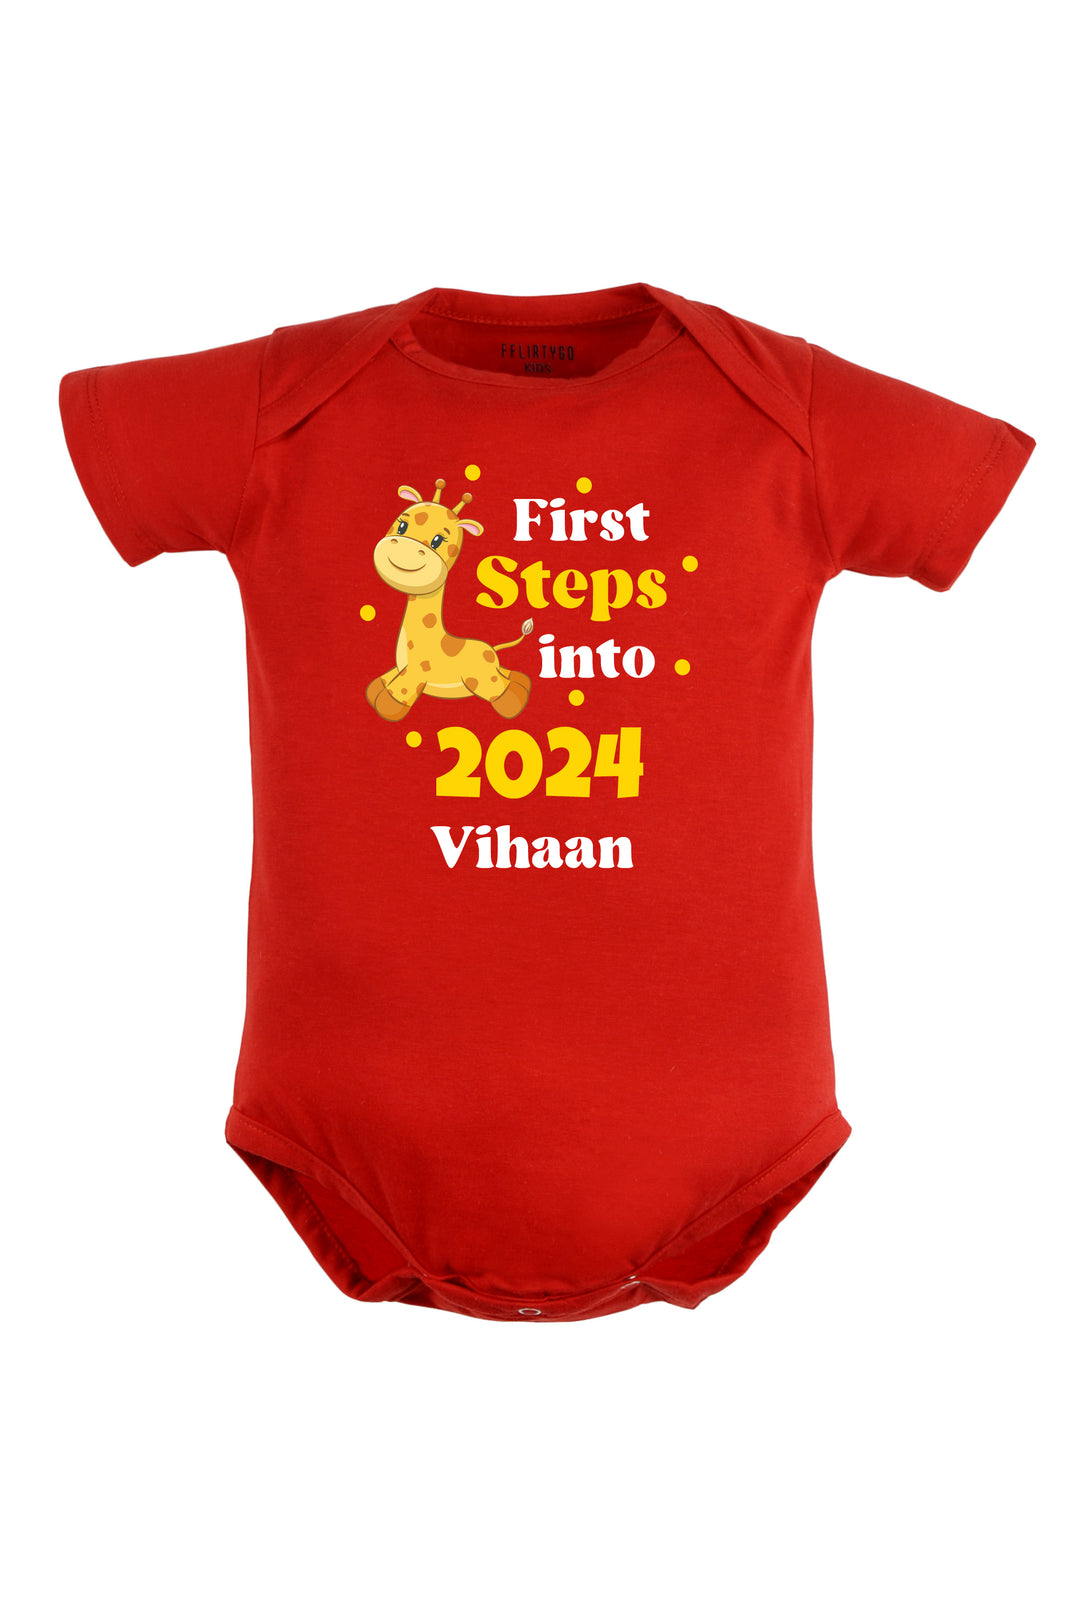 First Steps Into 2024 Baby Romper | Onesies w/ Custom Name